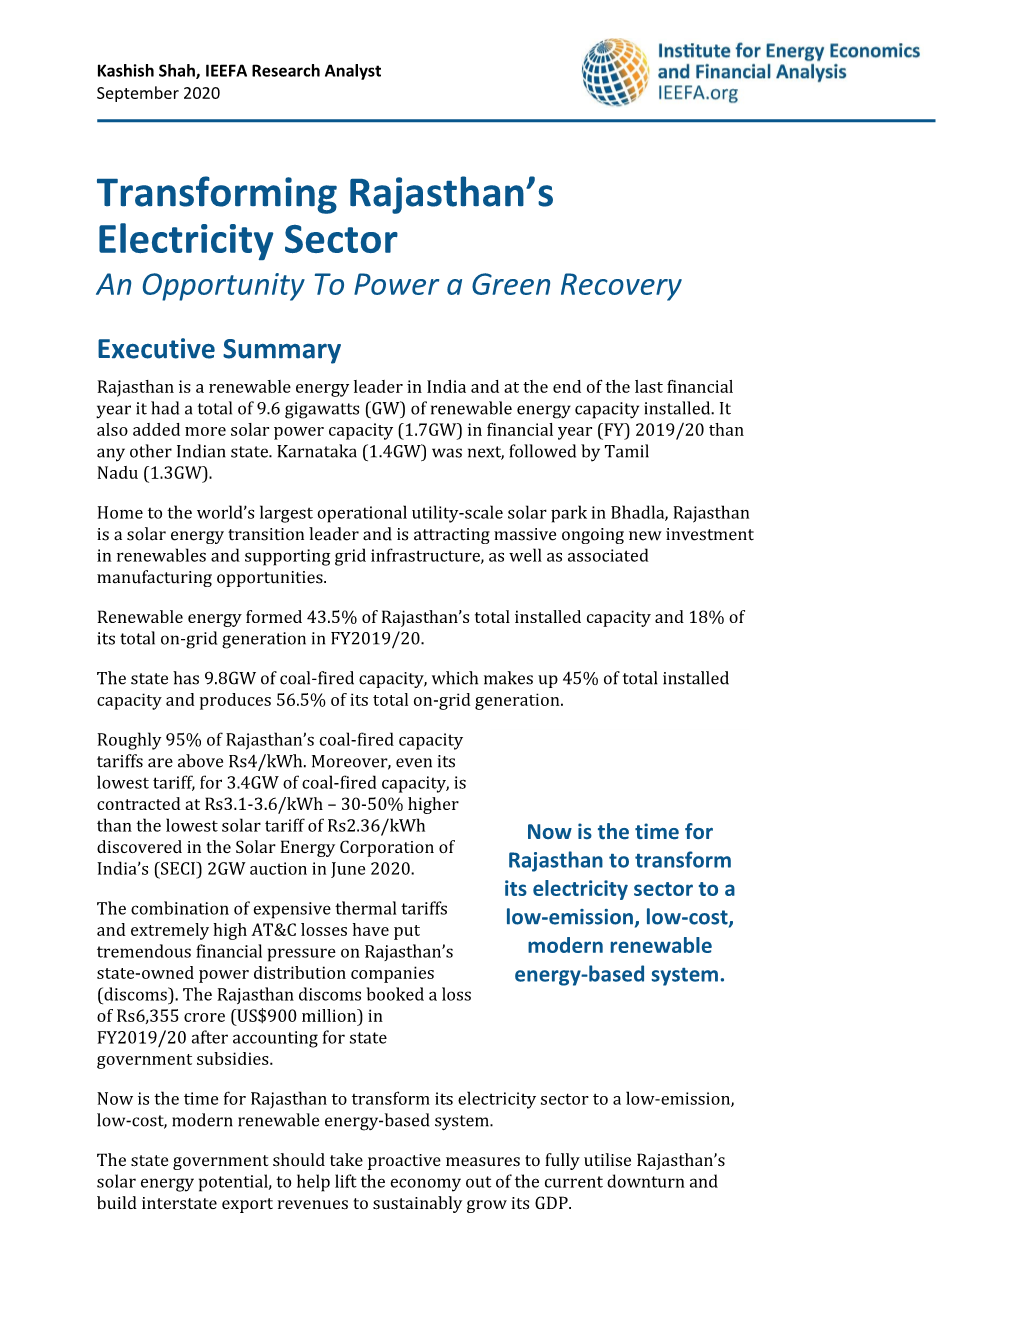 Transforming Rajasthan's Electricity Sector